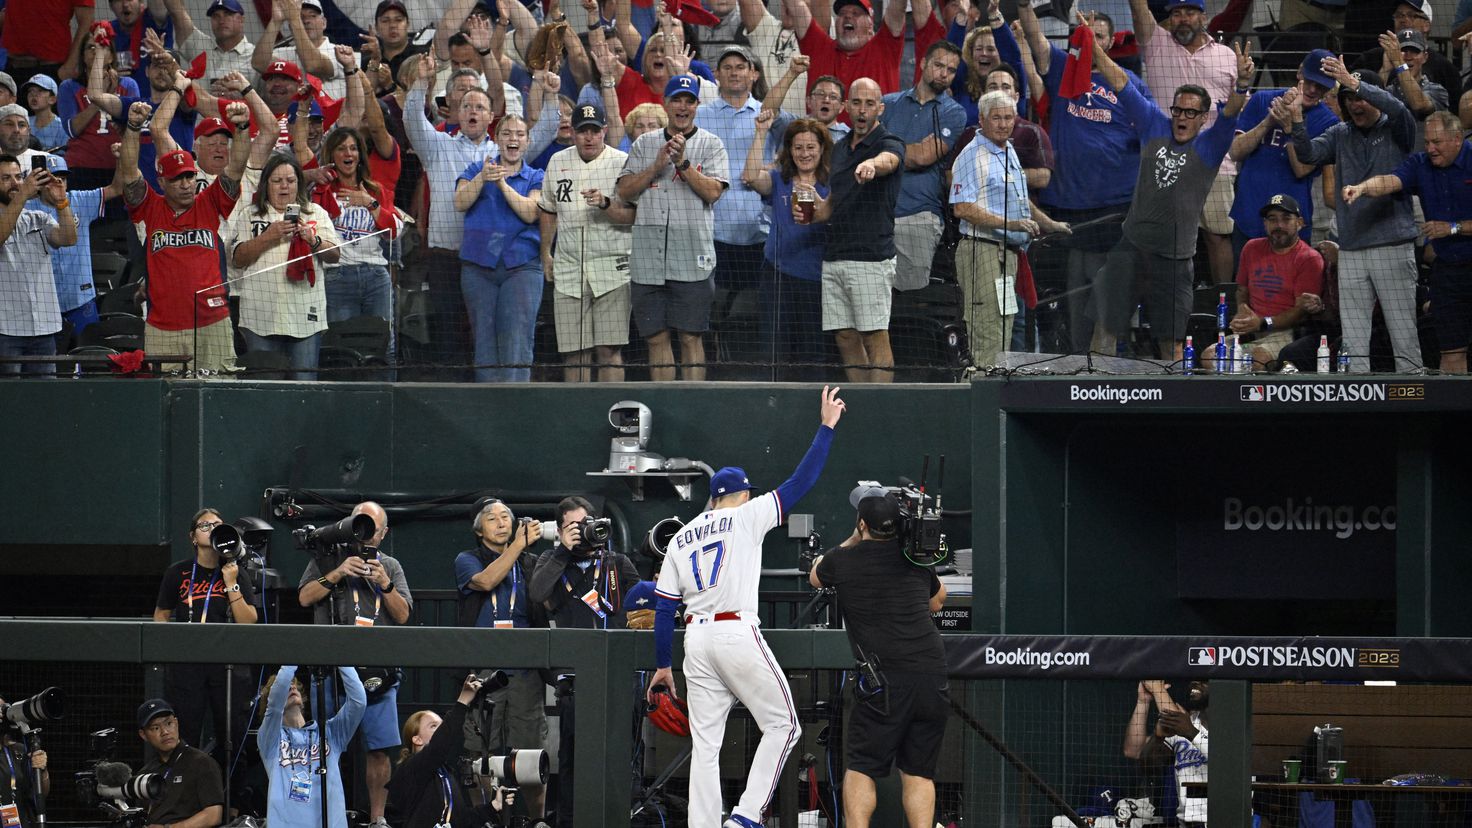 Cards come back from brink twice to force Game 7